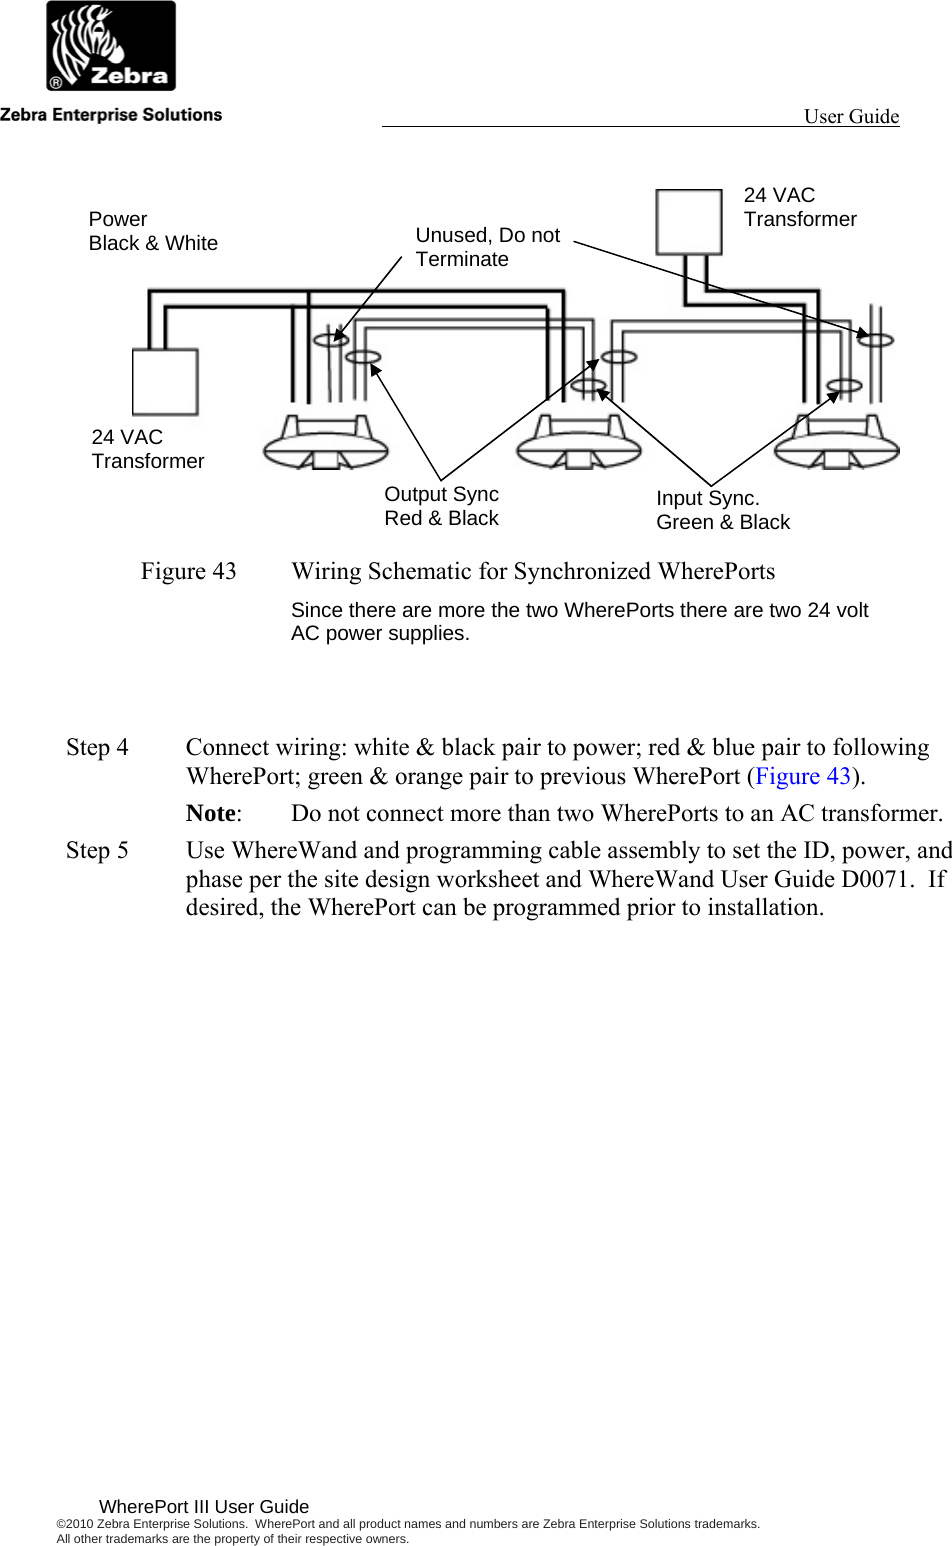                                                                                                                 User Guide                                        WherePort III User Guide ©2010 Zebra Enterprise Solutions.  WherePort and all product names and numbers are Zebra Enterprise Solutions trademarks.  All other trademarks are the property of their respective owners.      Figure 43  Wiring Schematic for Synchronized WherePorts Since there are more the two WherePorts there are two 24 volt AC power supplies.   Step 4  Connect wiring: white &amp; black pair to power; red &amp; blue pair to following WherePort; green &amp; orange pair to previous WherePort (Figure 43).   Note:  Do not connect more than two WherePorts to an AC transformer.  Step 5  Use WhereWand and programming cable assembly to set the ID, power, and phase per the site design worksheet and WhereWand User Guide D0071.  If desired, the WherePort can be programmed prior to installation.24 VAC Transformer 24 VAC Transformer Output Sync Red &amp; Black  Input Sync. Green &amp; Black Unused, Do not Terminate Power Black &amp; White 